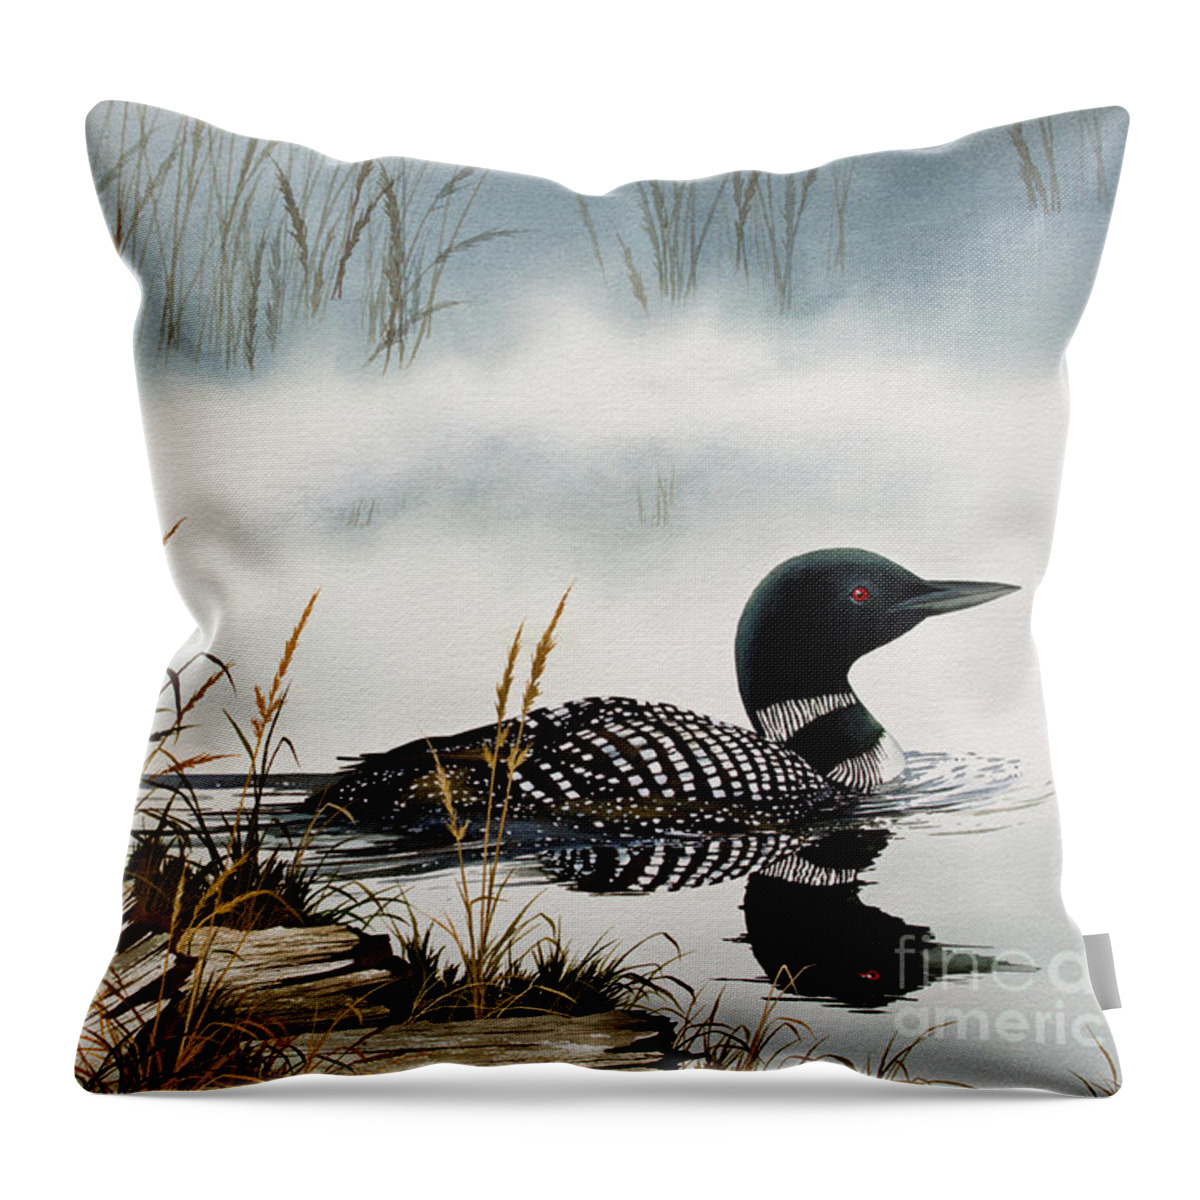 Loon Throw Pillow featuring the painting Loons Misty Shore by James Williamson